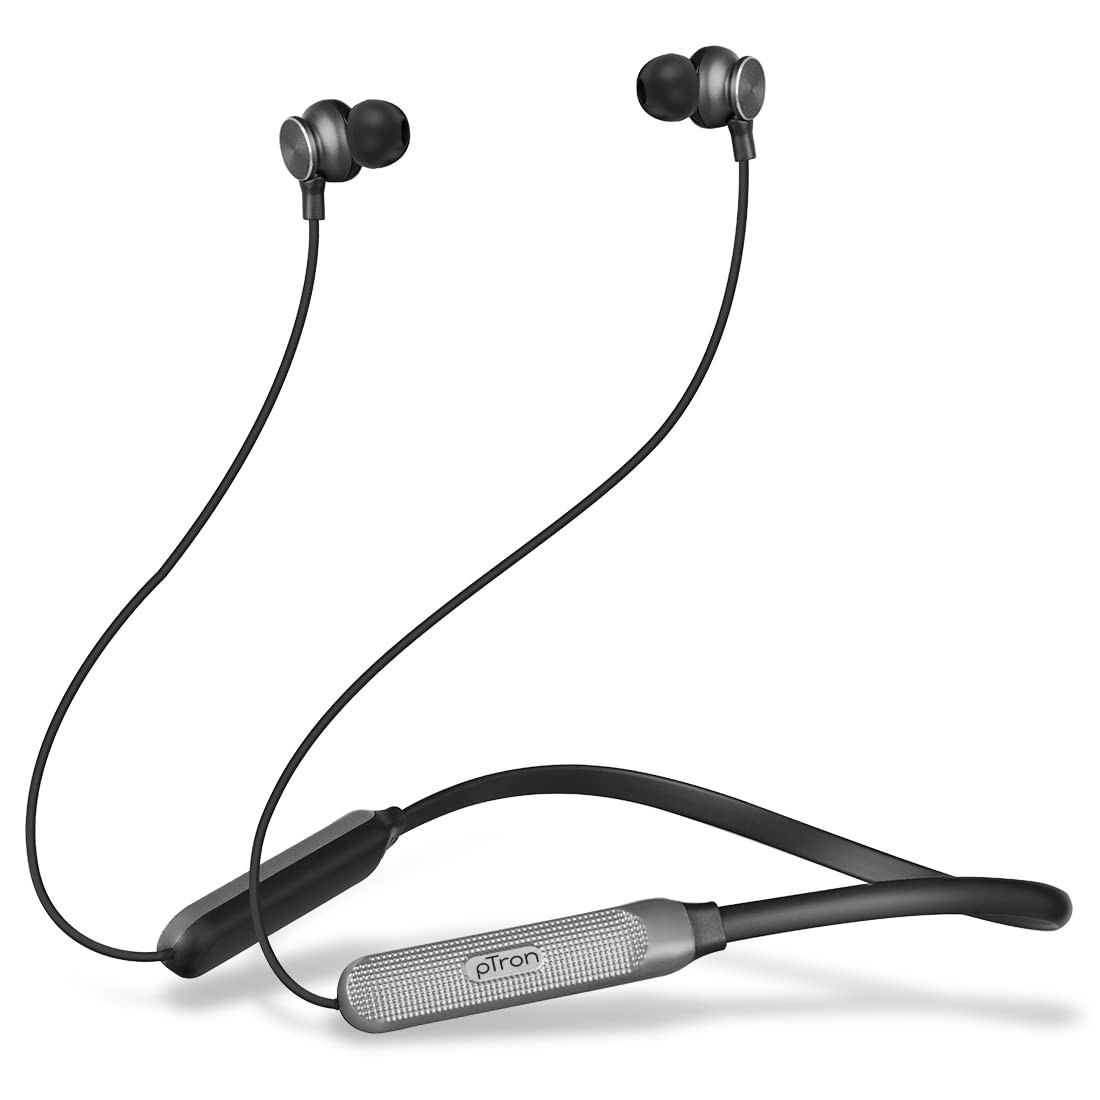 pTron Tangent Duo Bluetooth 52 Wireless in Ear Headphones 13mm Driver Deep Bass HD Calls Fast Charging Type-C Neckband Dual Pairing Voice Assistant  IPX4 Water Resistant BlackGrey